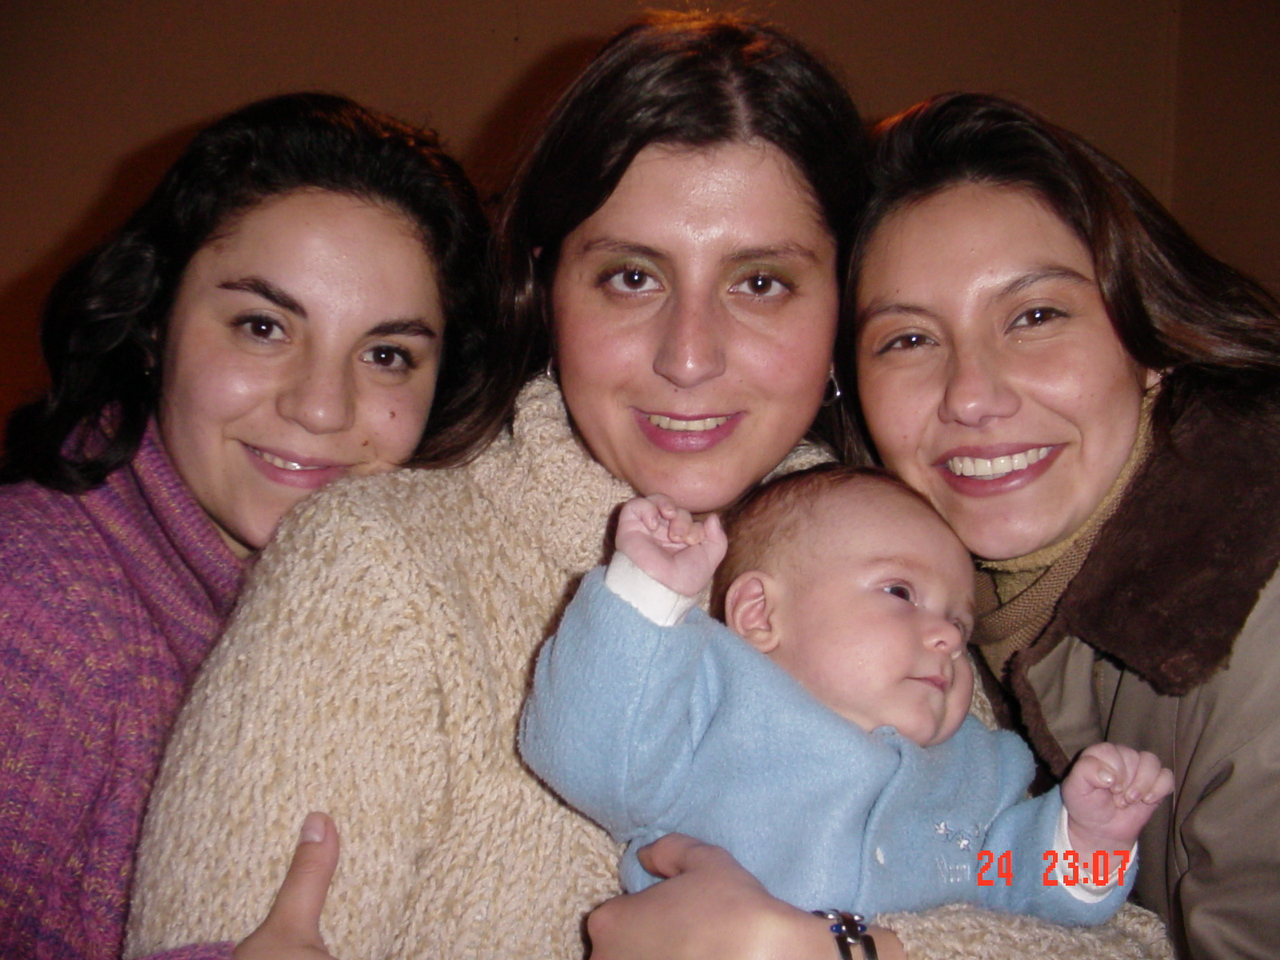 four people pose together for the camera with one holding a baby